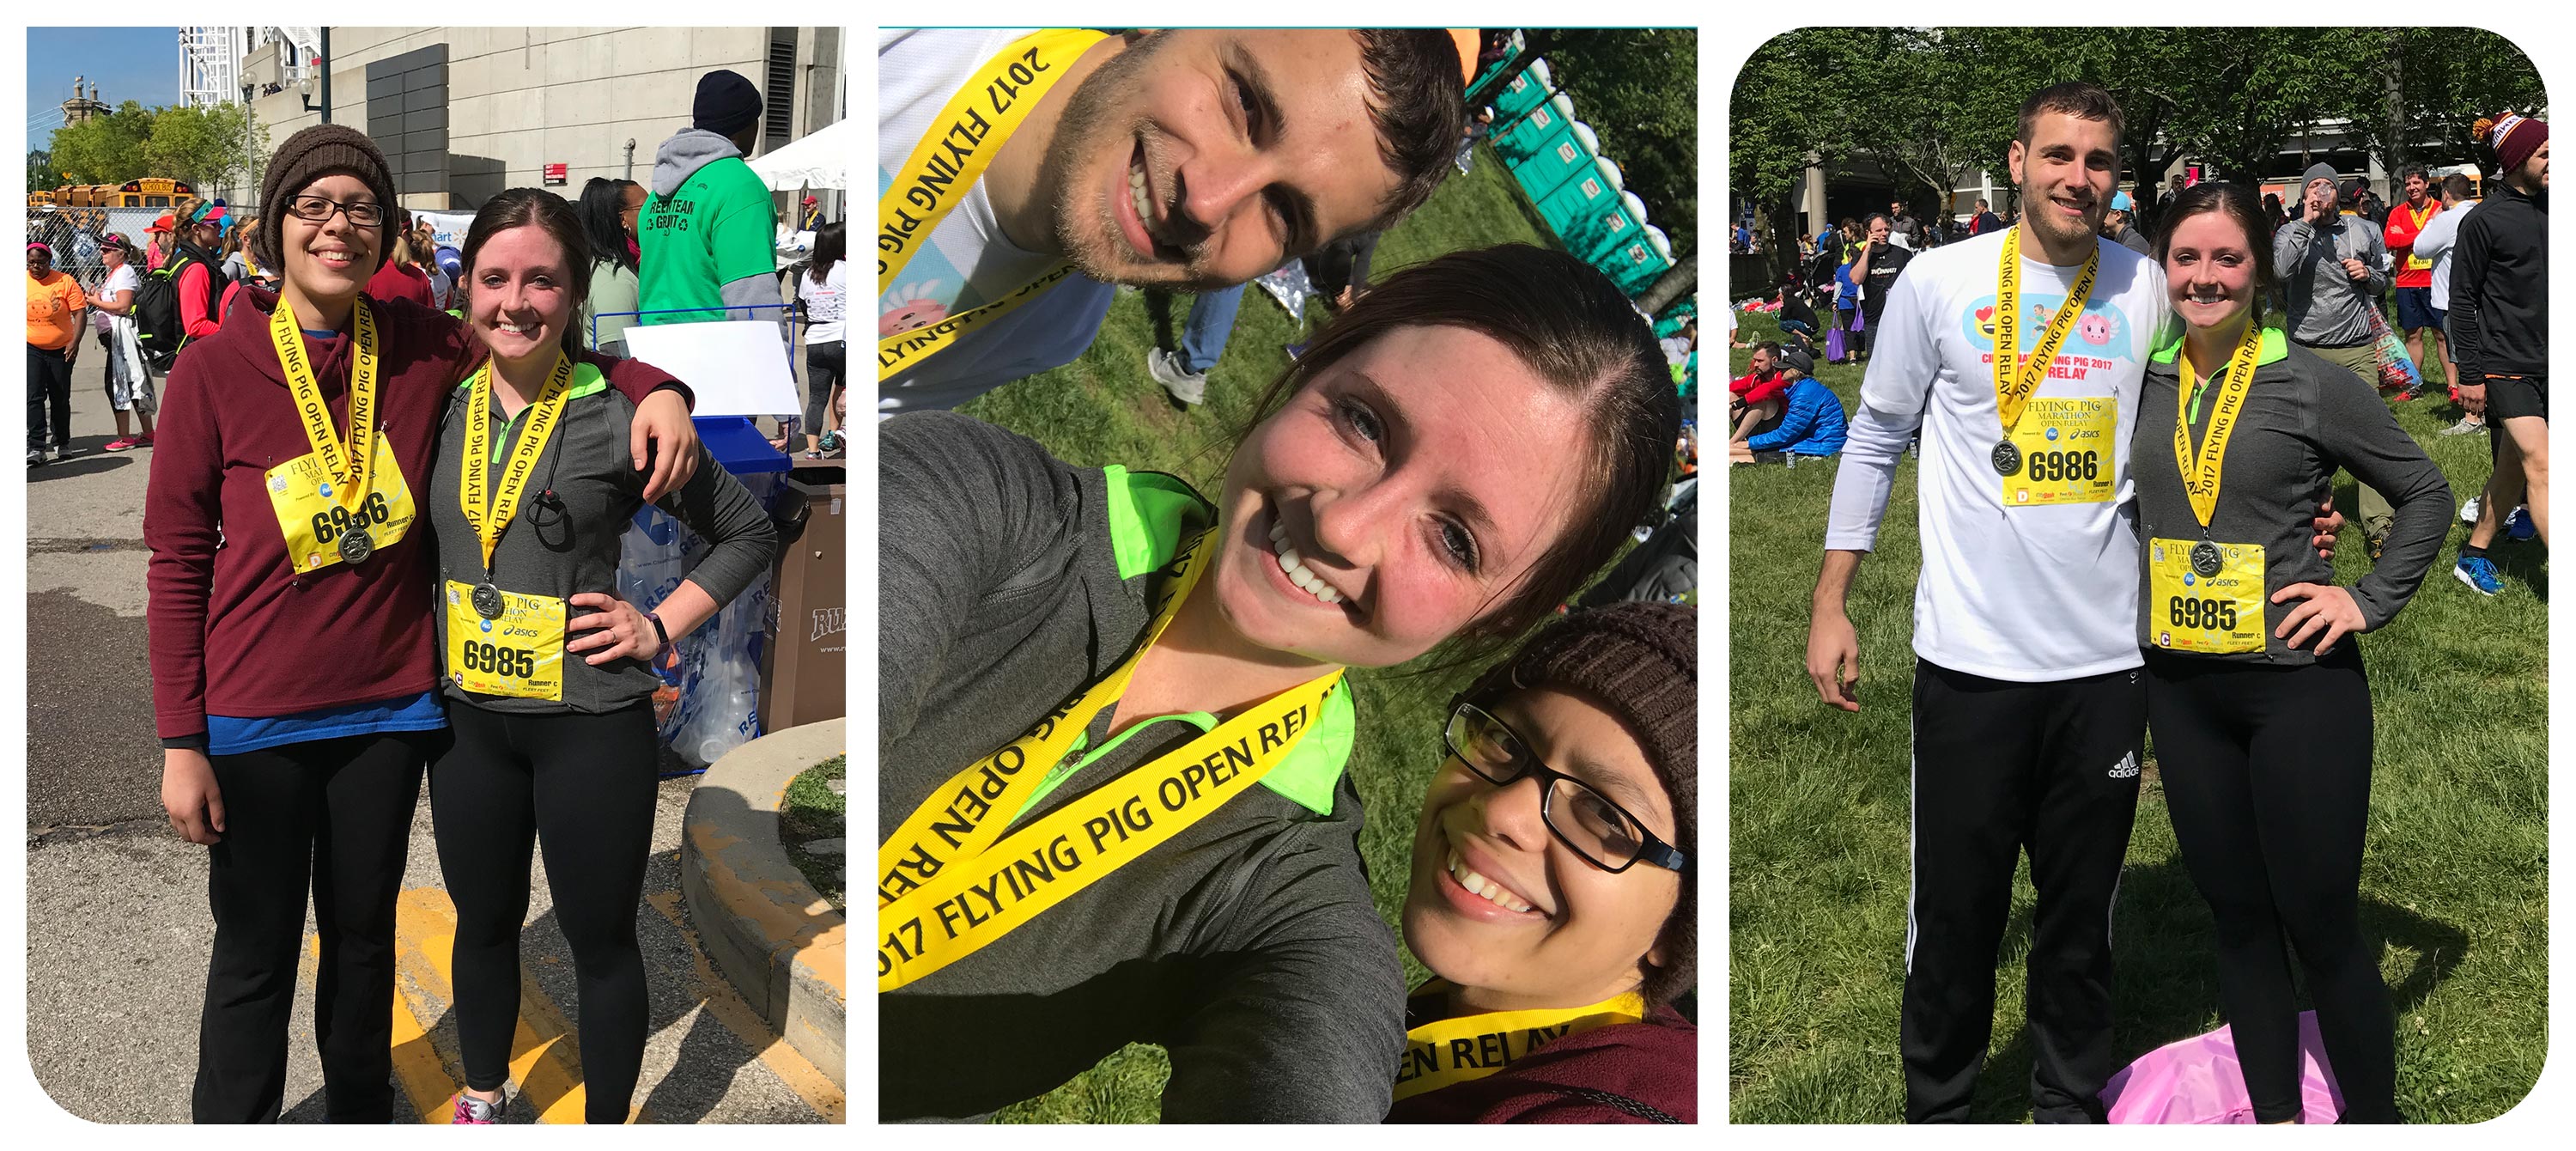 Photos of our co-op, Kristin, and other Schaefer employees at the 2017 Flying Pig Relay Race.